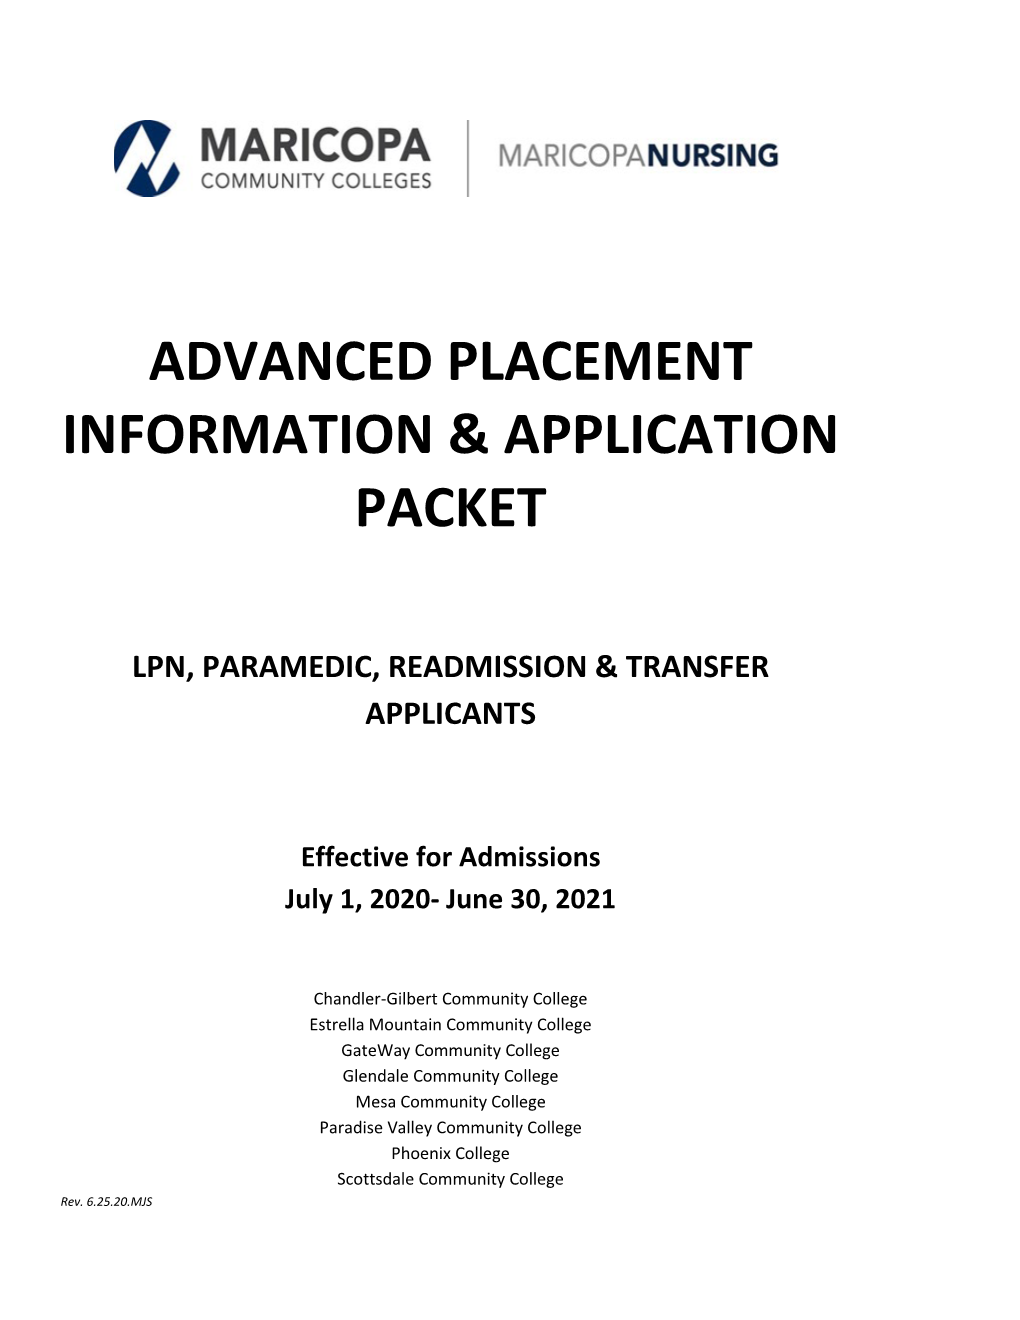 Advanced Placement Information & Application